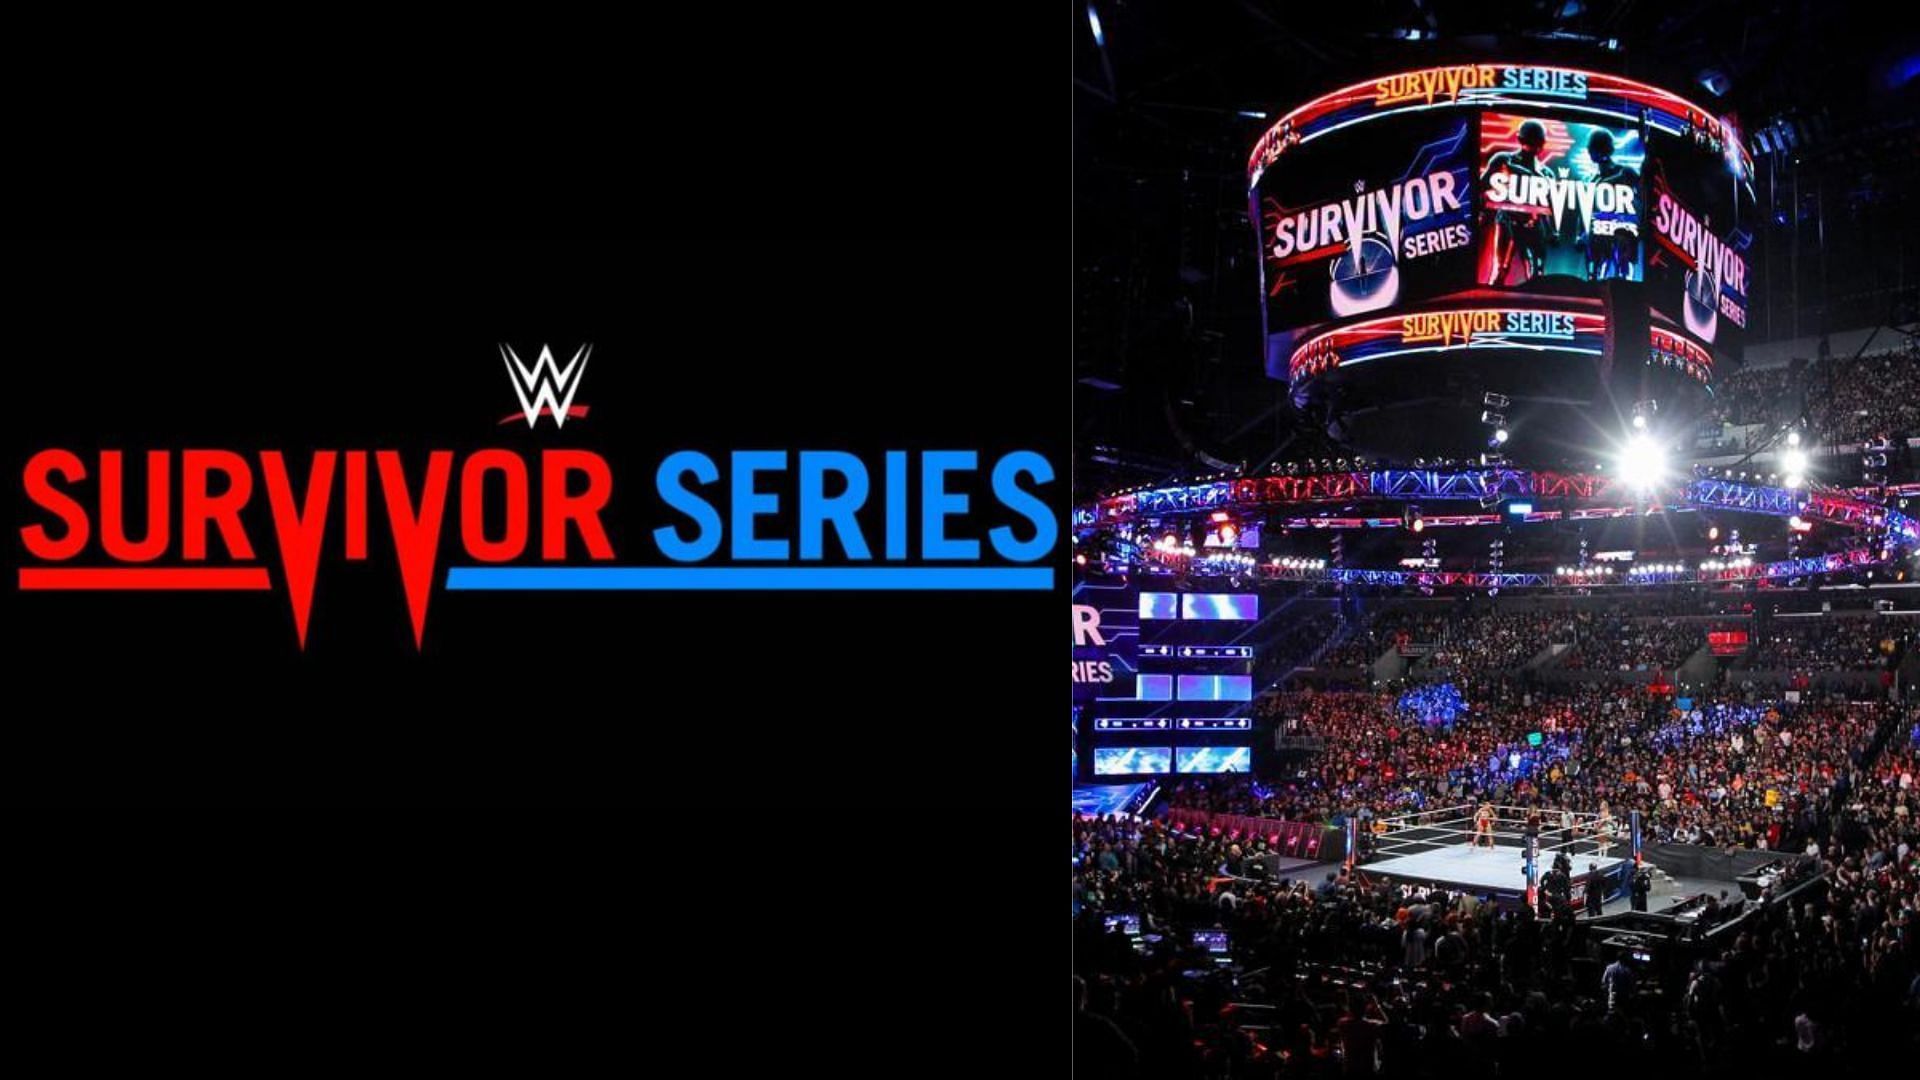 Survivor Series will take place later this year.